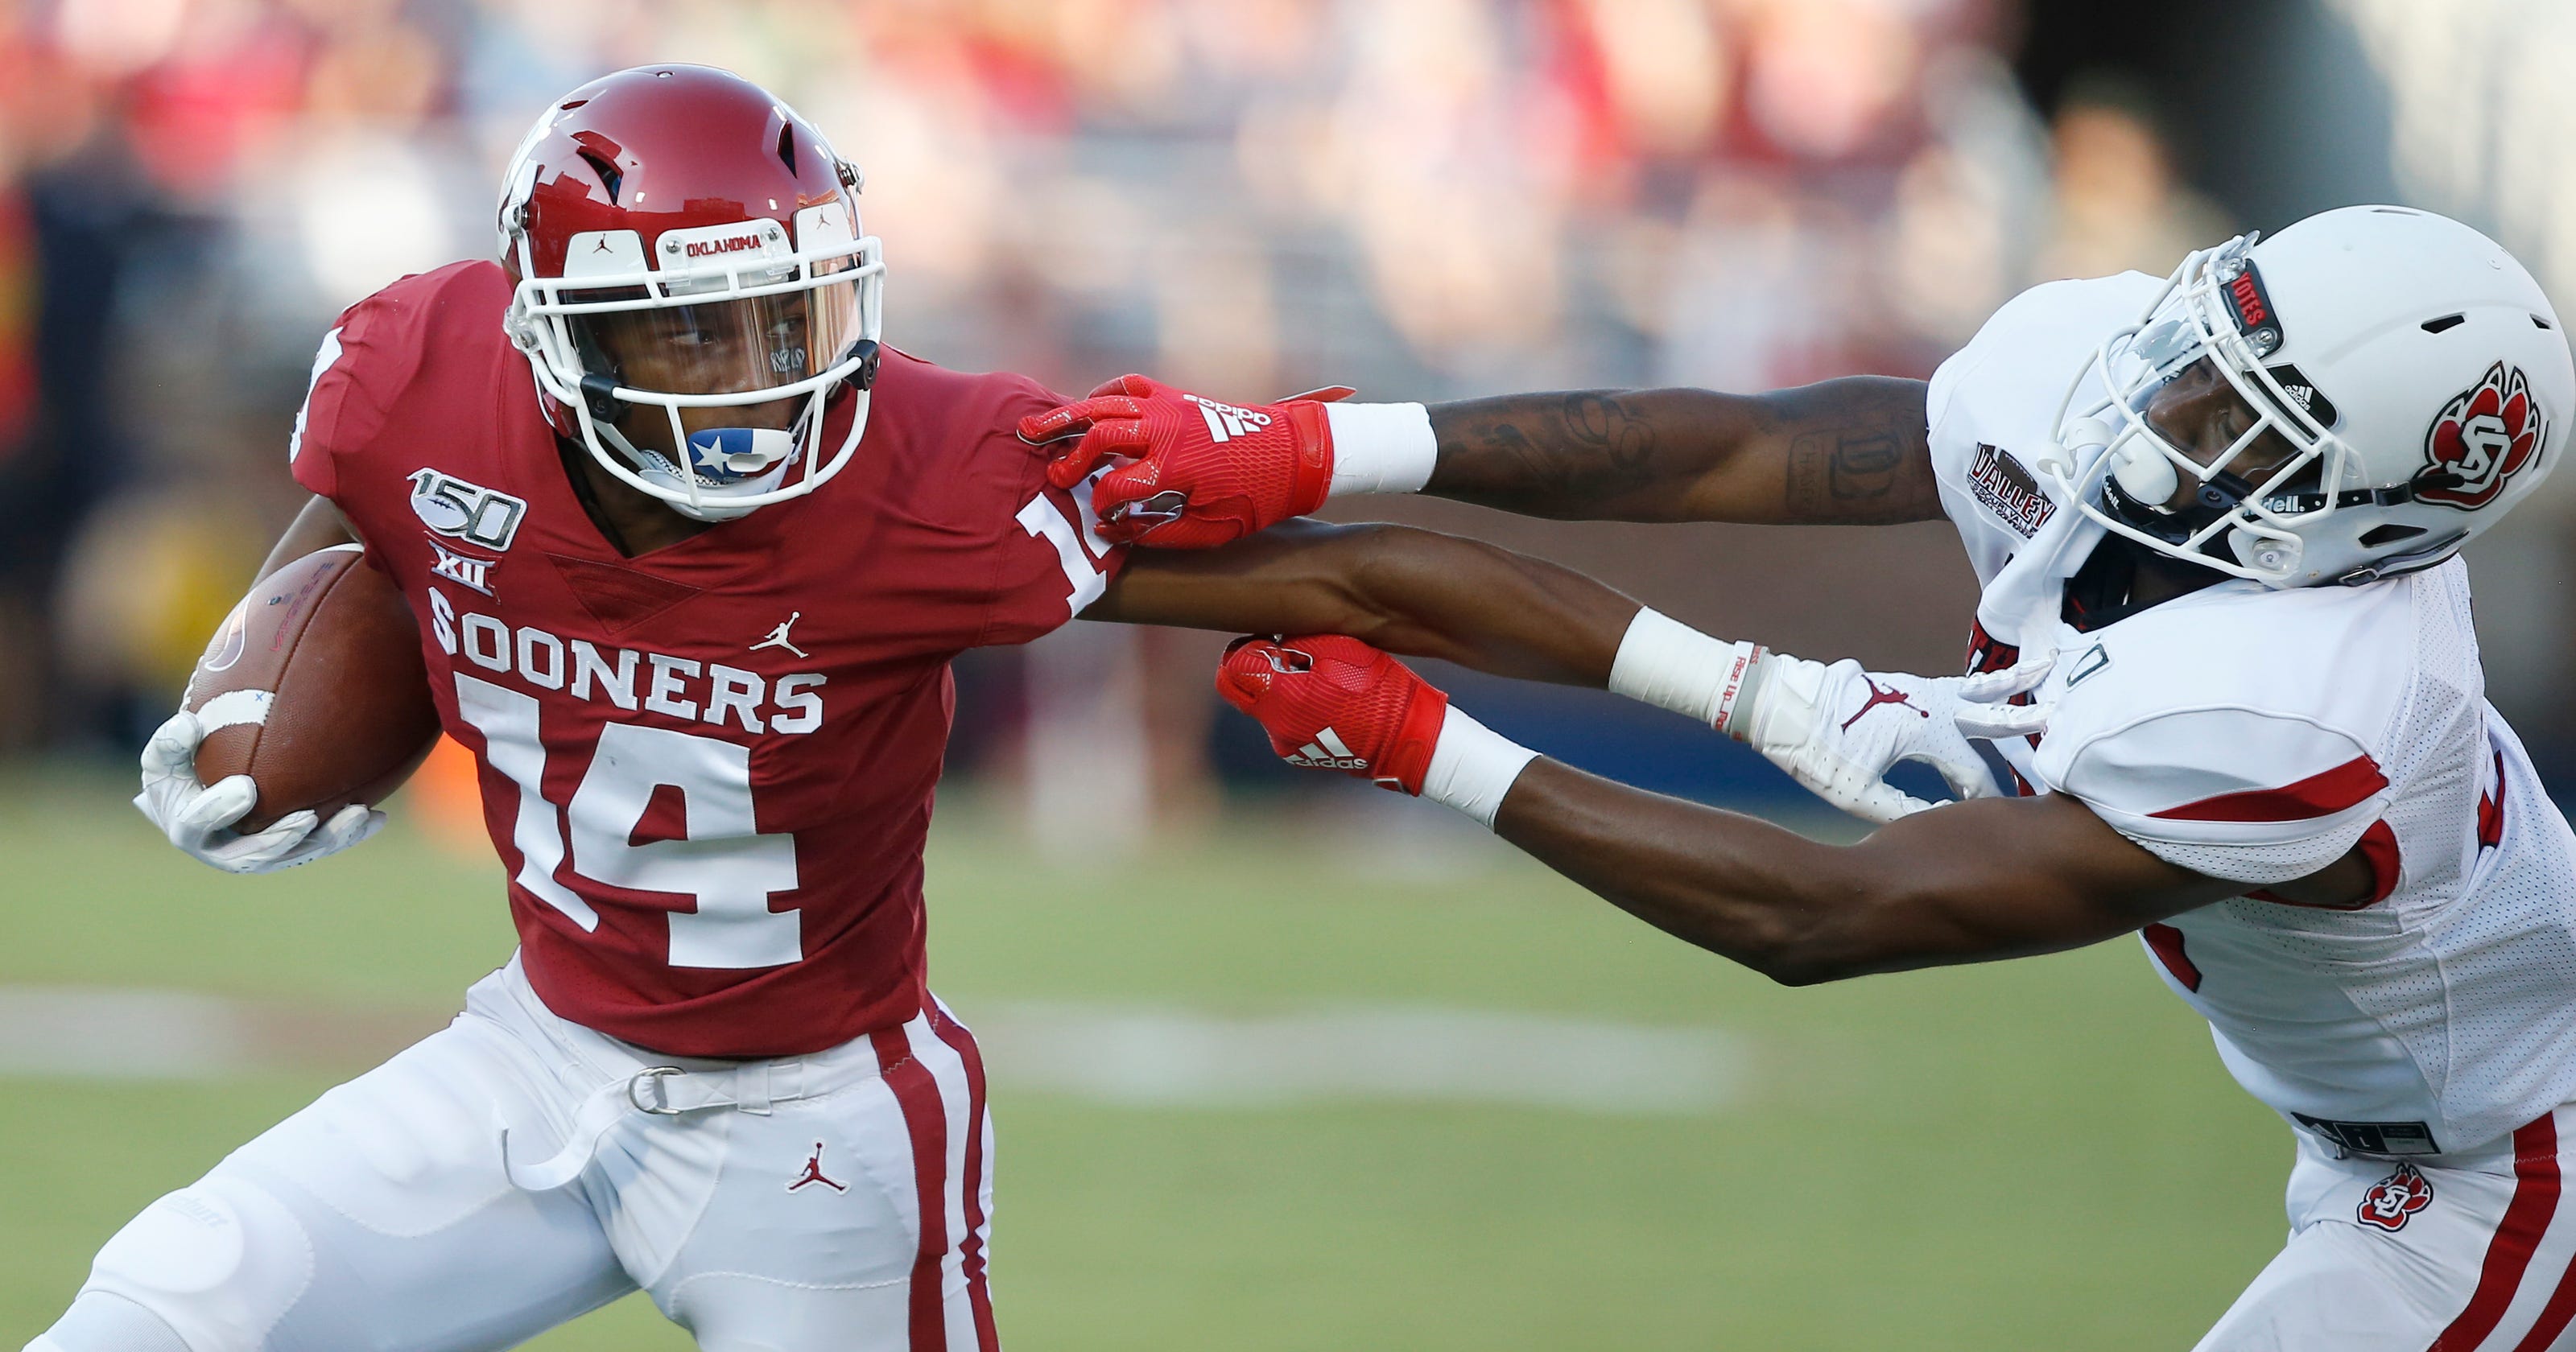 No 4 Oklahoma Sooners Roll Up Over 700 Yards In Rout Of